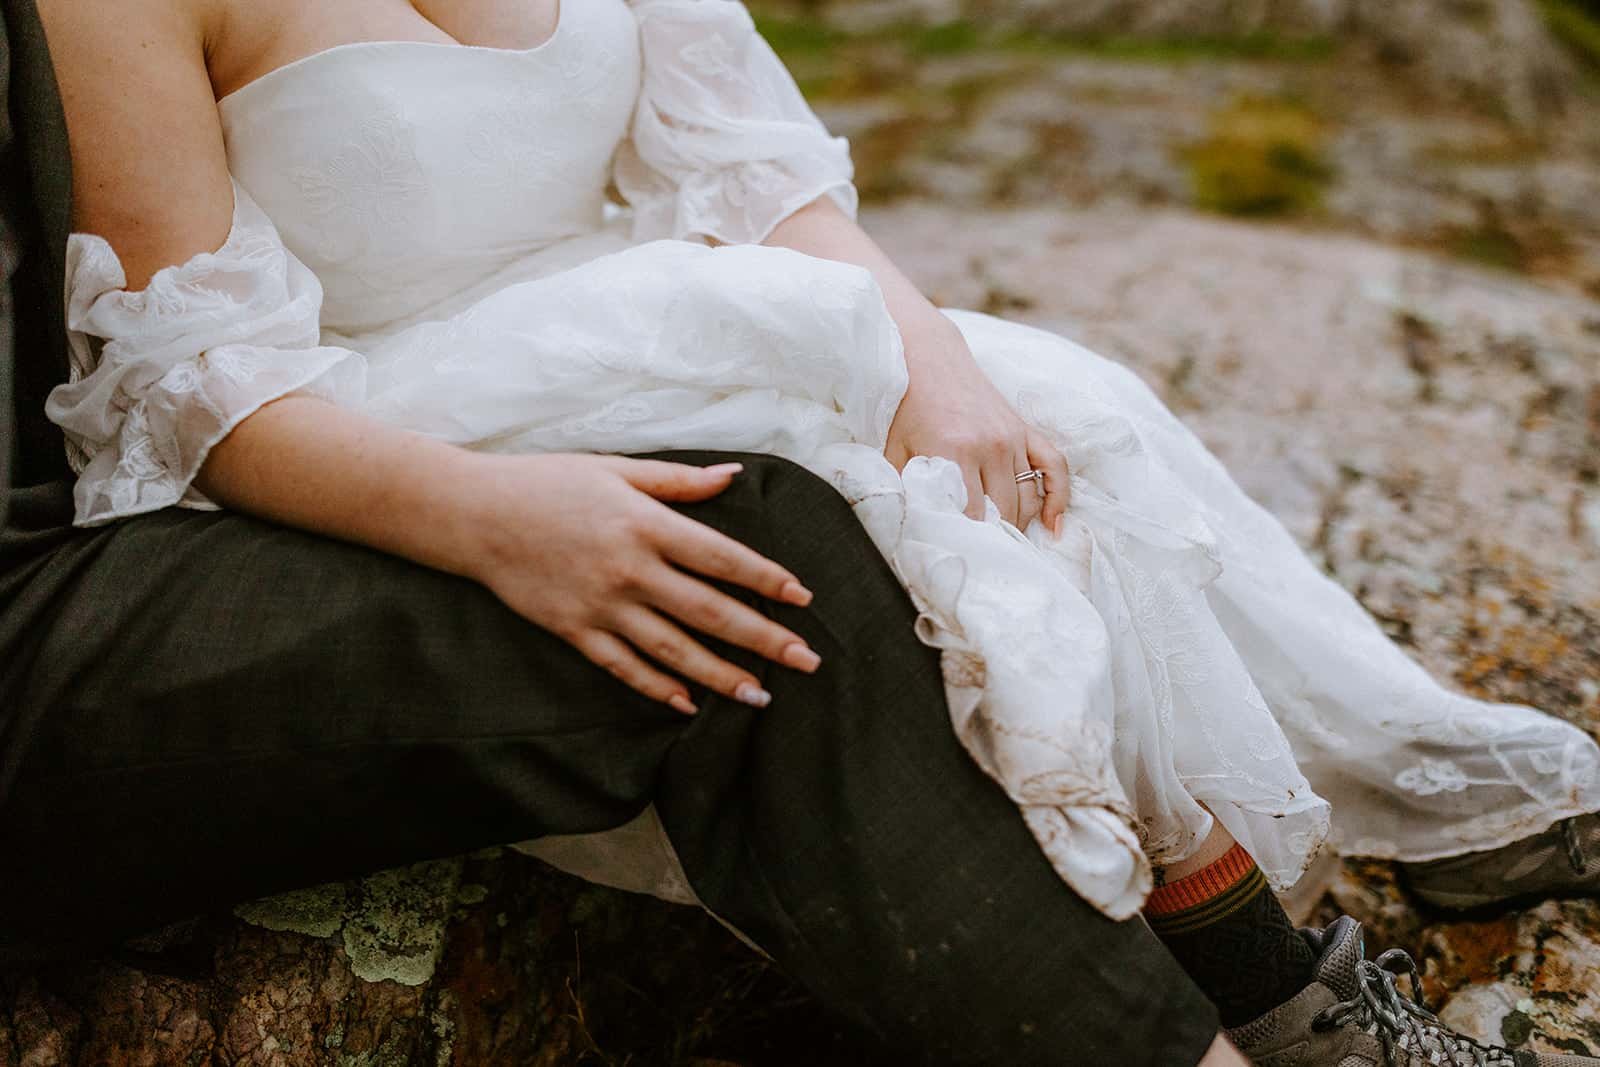 A woman in a wedding dress places her hand on her partners knee